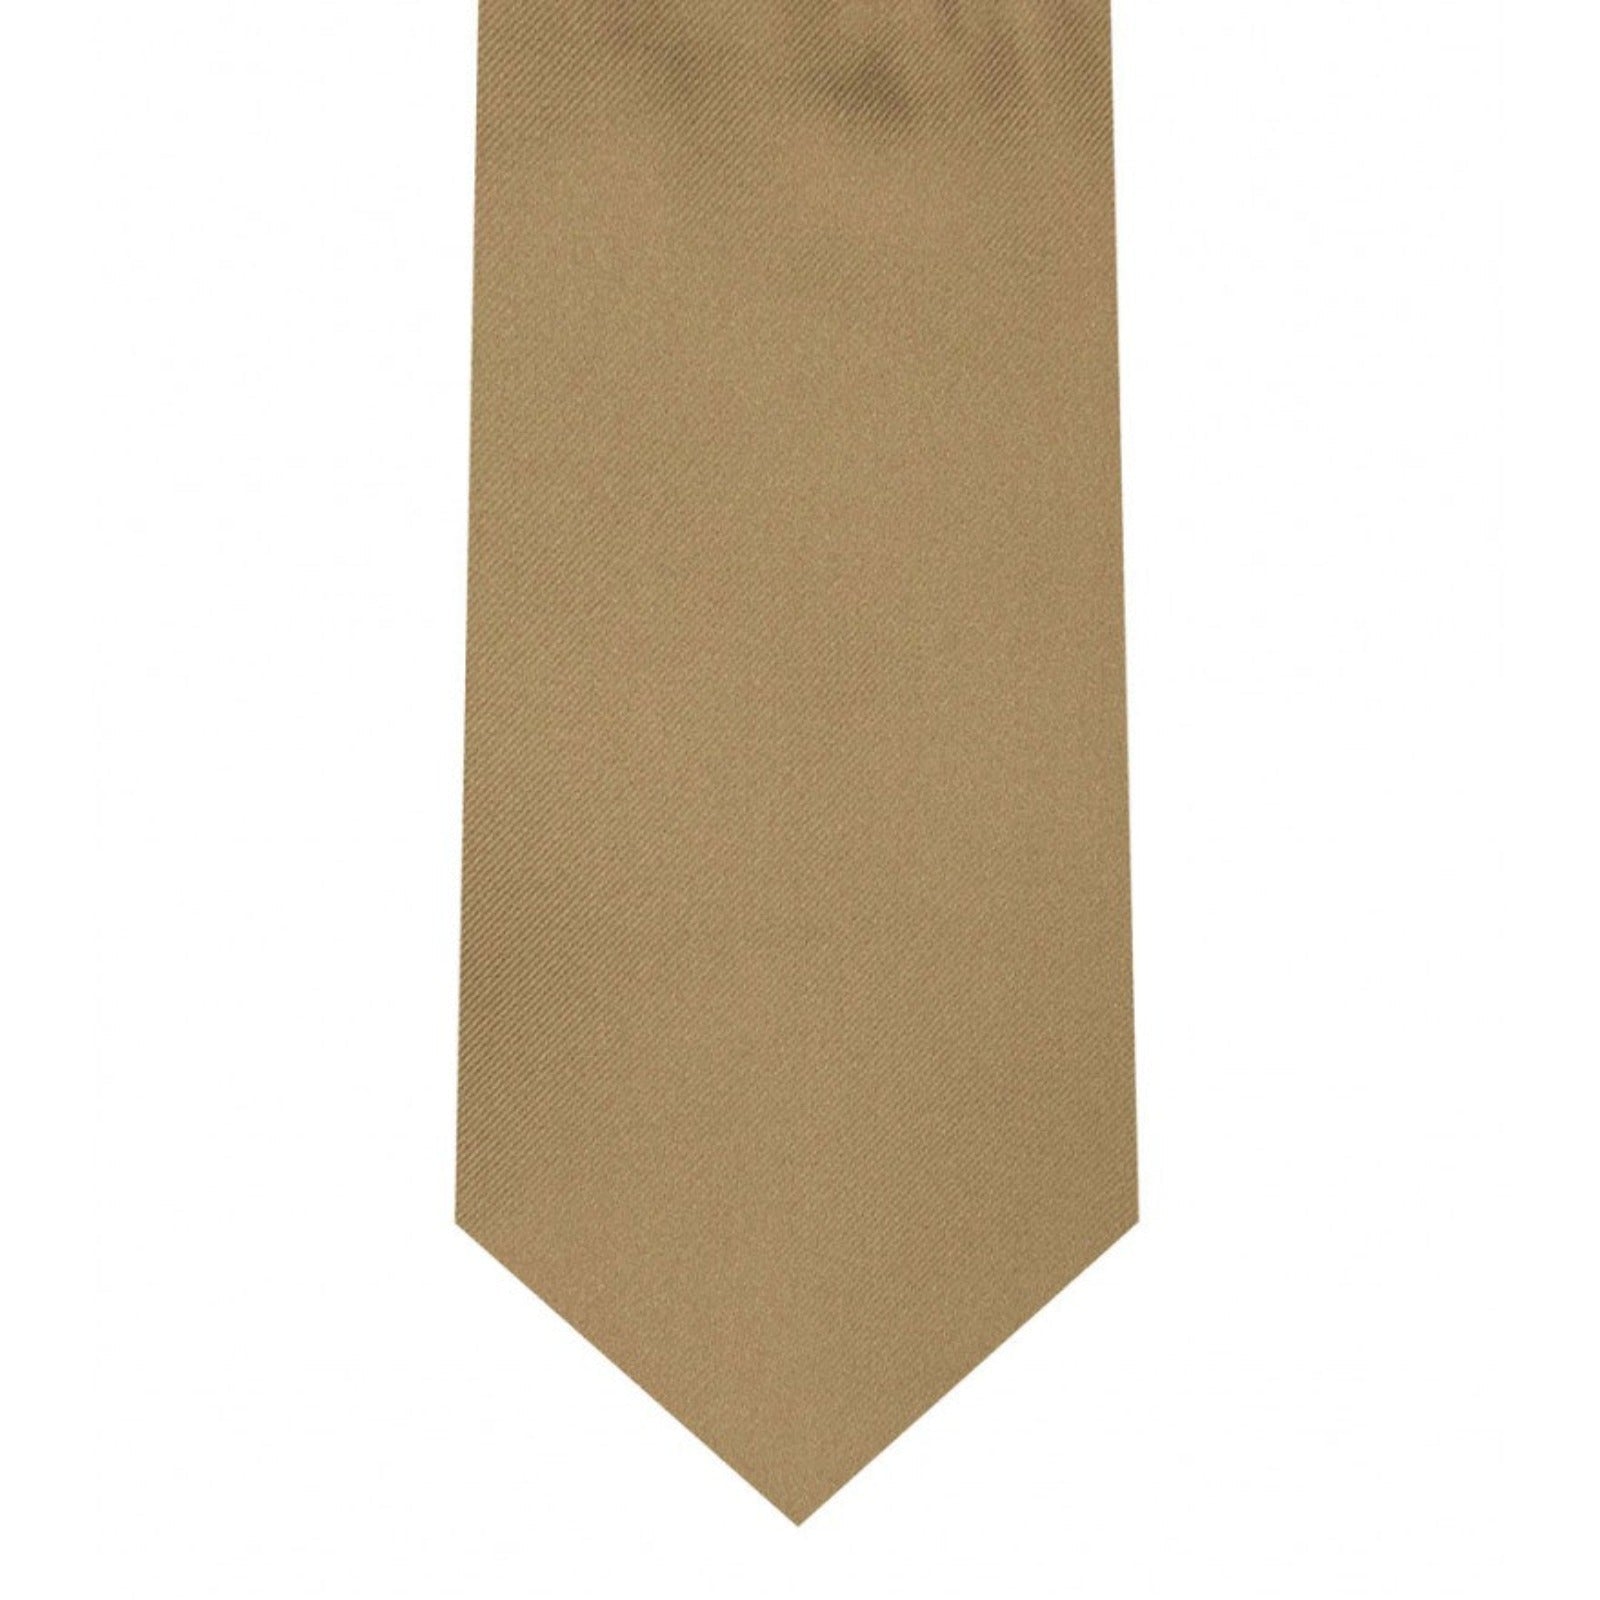 Classic Taupe Tie Skinny width 2.75 inches With Matching Pocket Square | KCT Menswear 